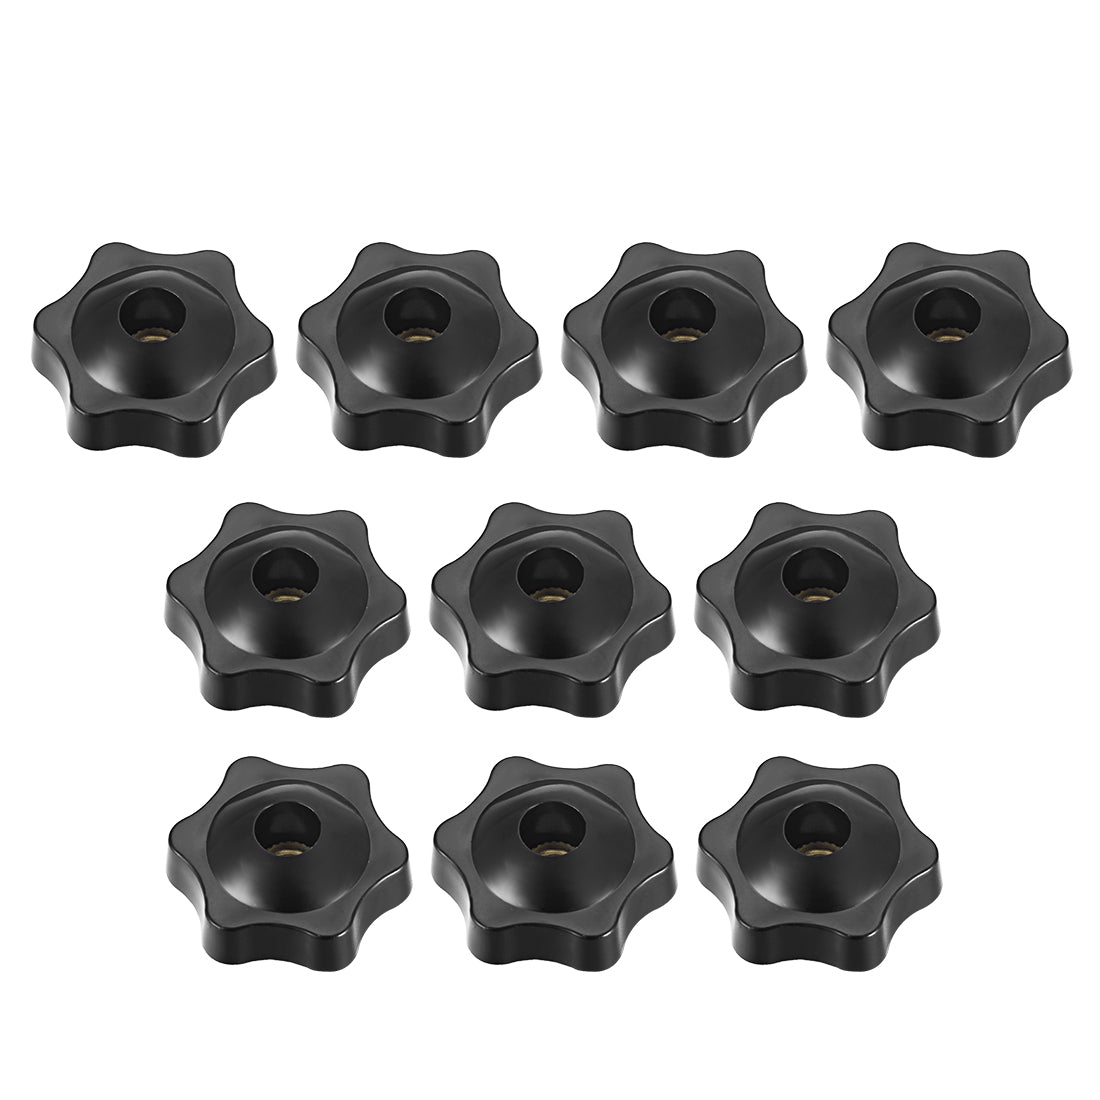 uxcell Uxcell Clamping Handle Gripandles Screw Knobs Handgrips Threaded Star-Shape 10 pcs